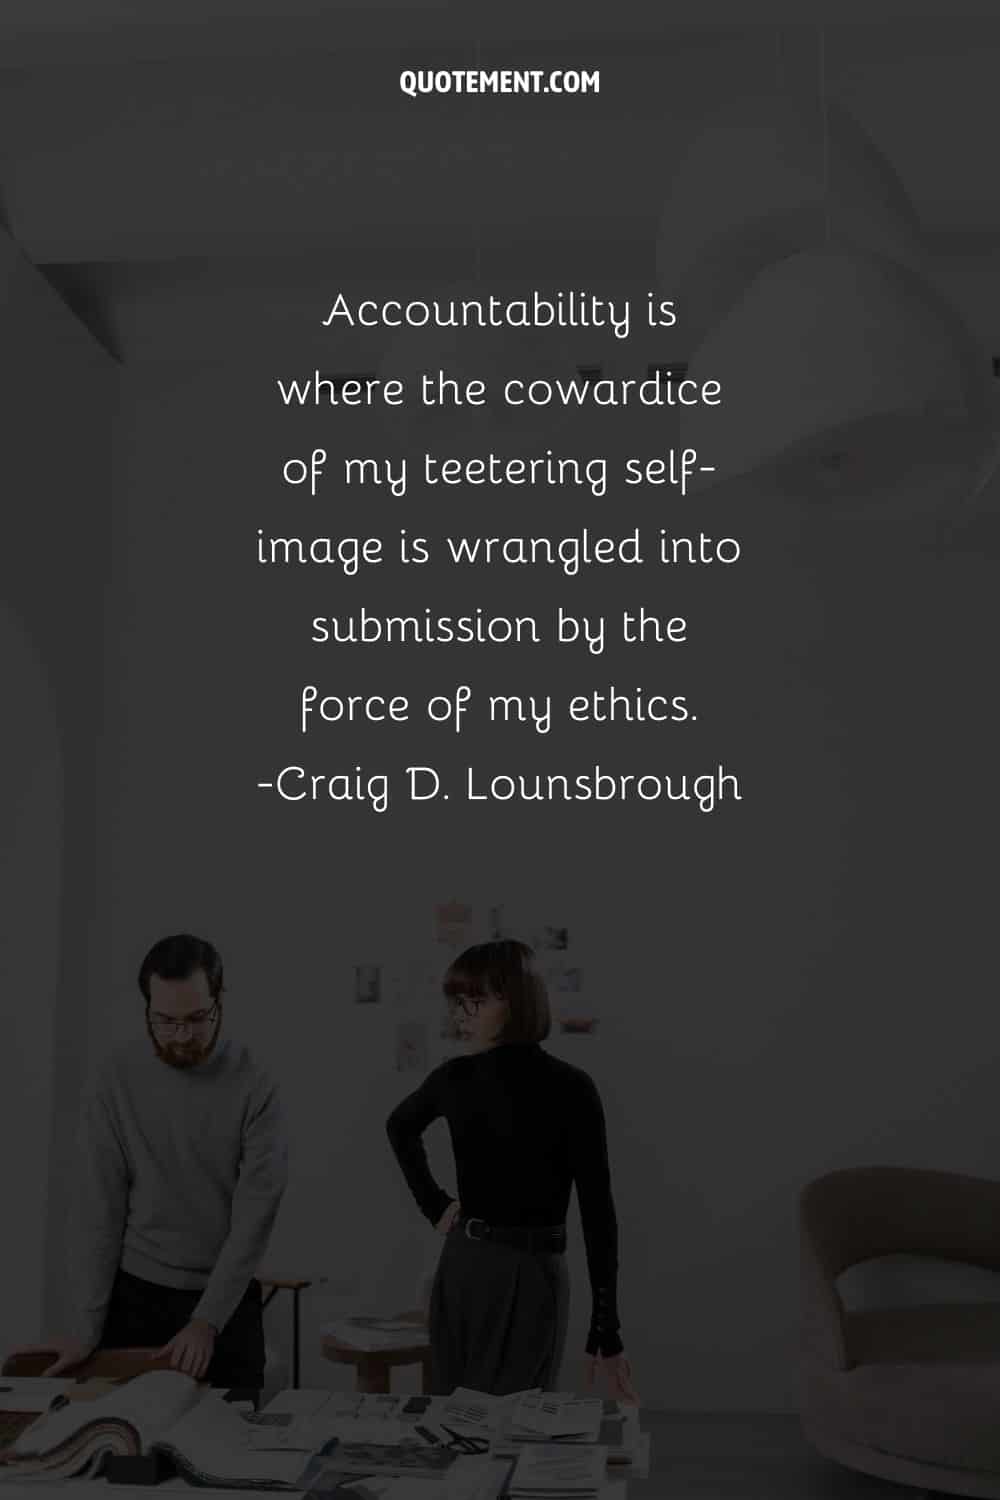 Accountability is where the cowardice of my teetering self-image is wrangled into submission by the force of my ethics